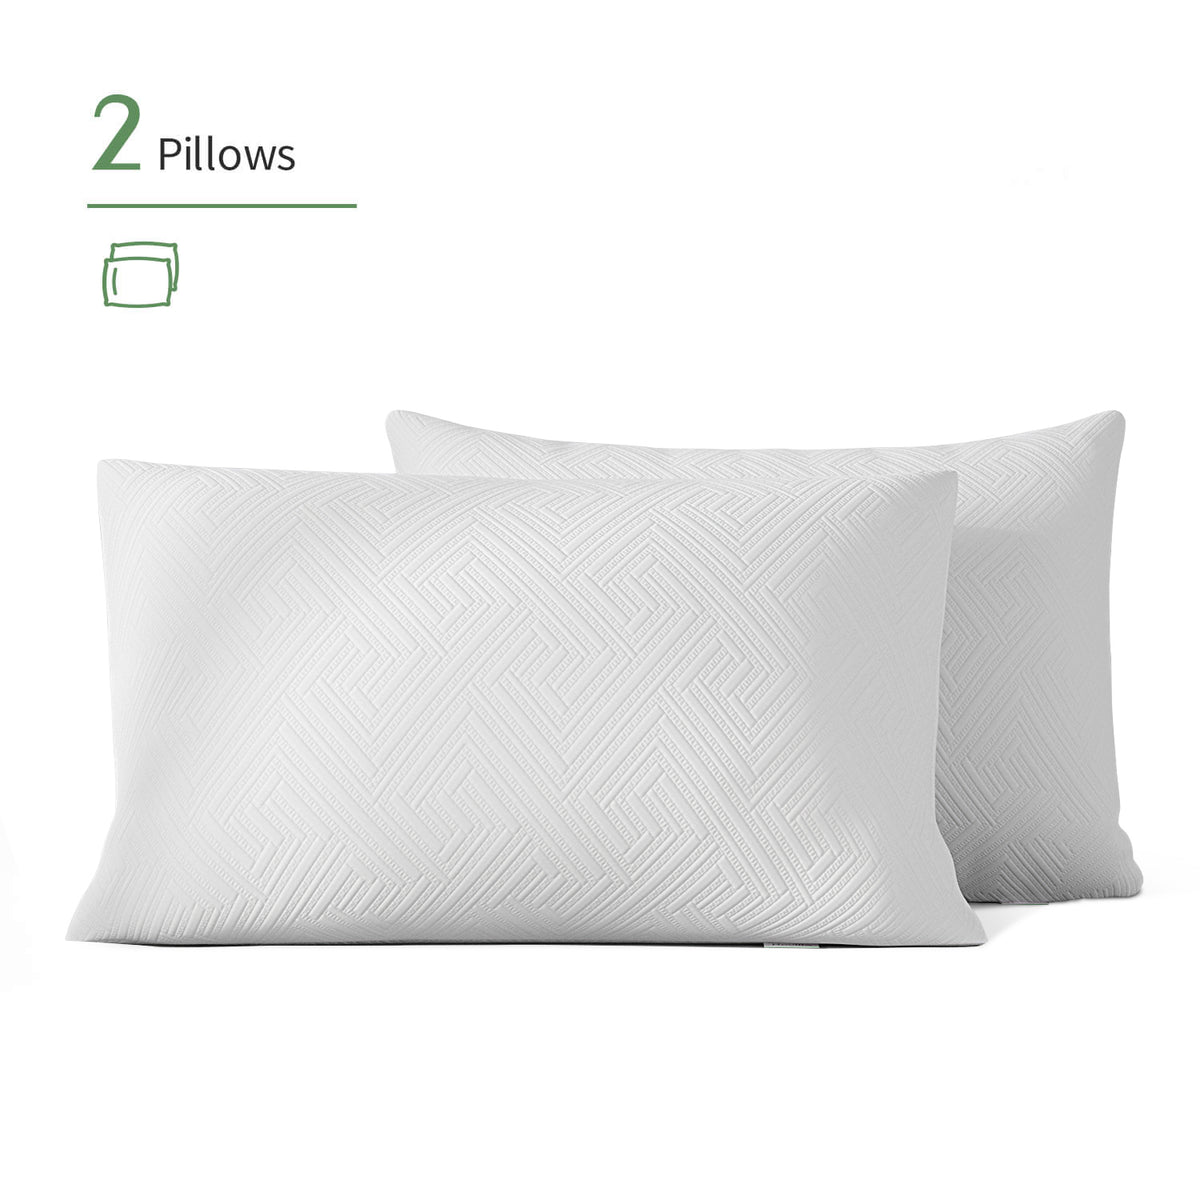 Shredded Memory Foam Pillow, Pillows for Side and Back Sleepers, Soft and Supportive